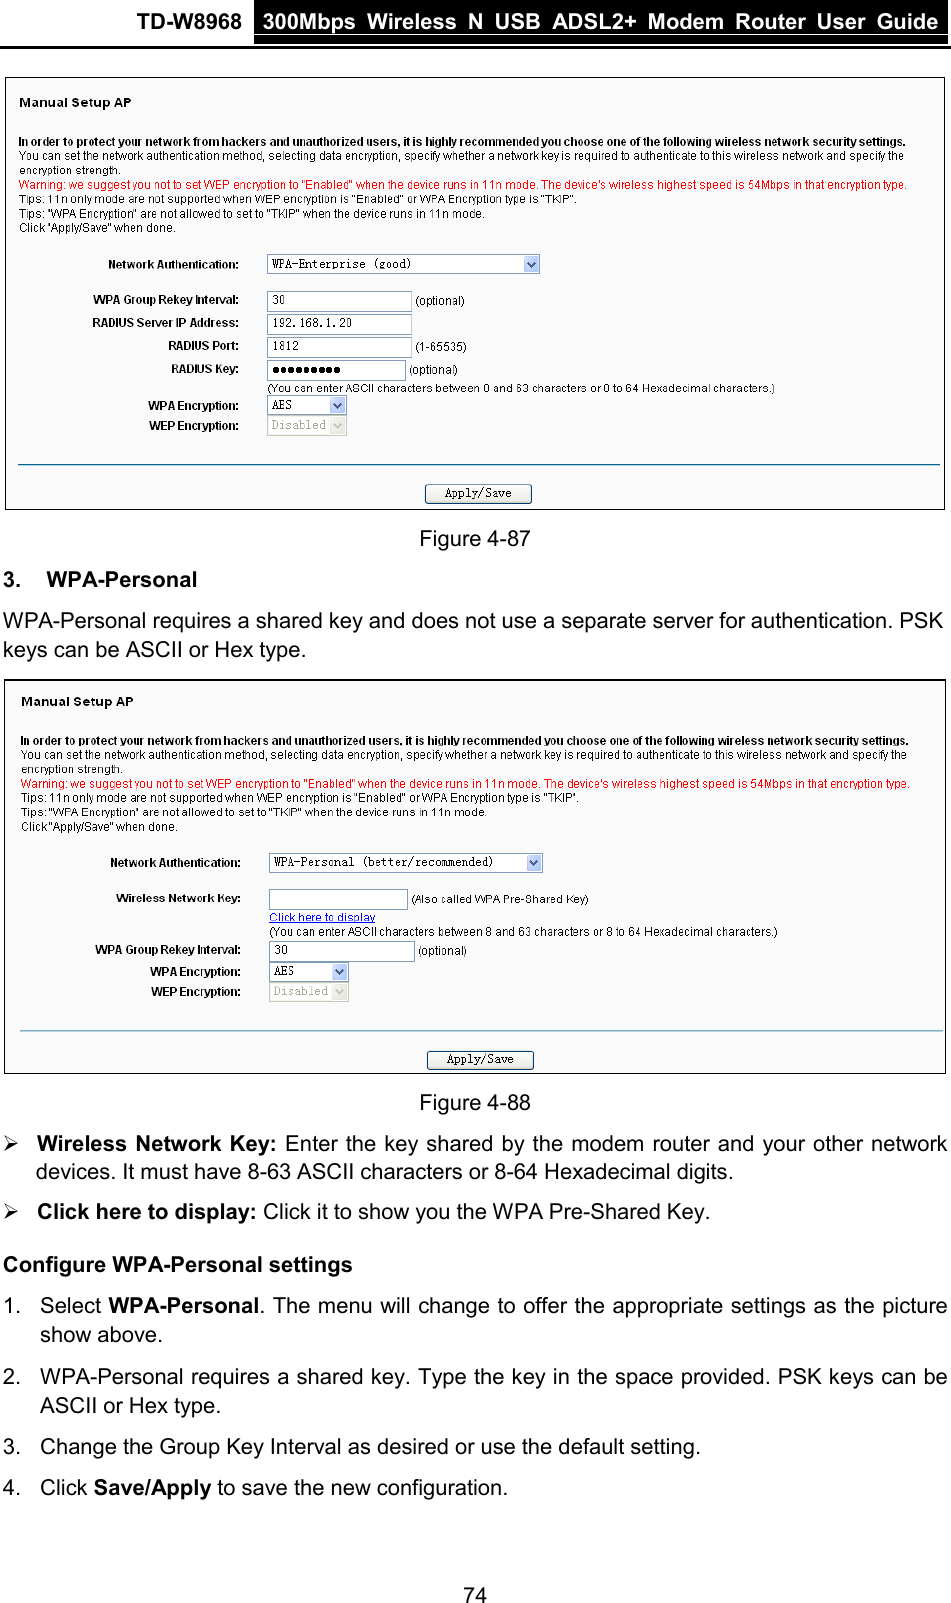 TD-W8968 300Mbps Wireless  N  USB ADSL2+ Modem Router  User Guide   Figure 4-87 3. WPA-Personal WPA-Personal requires a shared key and does not use a separate server for authentication. PSK keys can be ASCII or Hex type.  Figure 4-88  Wireless Network Key: Enter the key shared by the modem router and your other network devices. It must have 8-63 ASCII characters or 8-64 Hexadecimal digits.  Click here to display: Click it to show you the WPA Pre-Shared Key. Configure WPA-Personal settings 1.  Select WPA-Personal. The menu will change to offer the appropriate settings as the picture show above. 2. WPA-Personal requires a shared key. Type the key in the space provided. PSK keys can be ASCII or Hex type. 3. Change the Group Key Interval as desired or use the default setting. 4. Click Save/Apply to save the new configuration. 74 